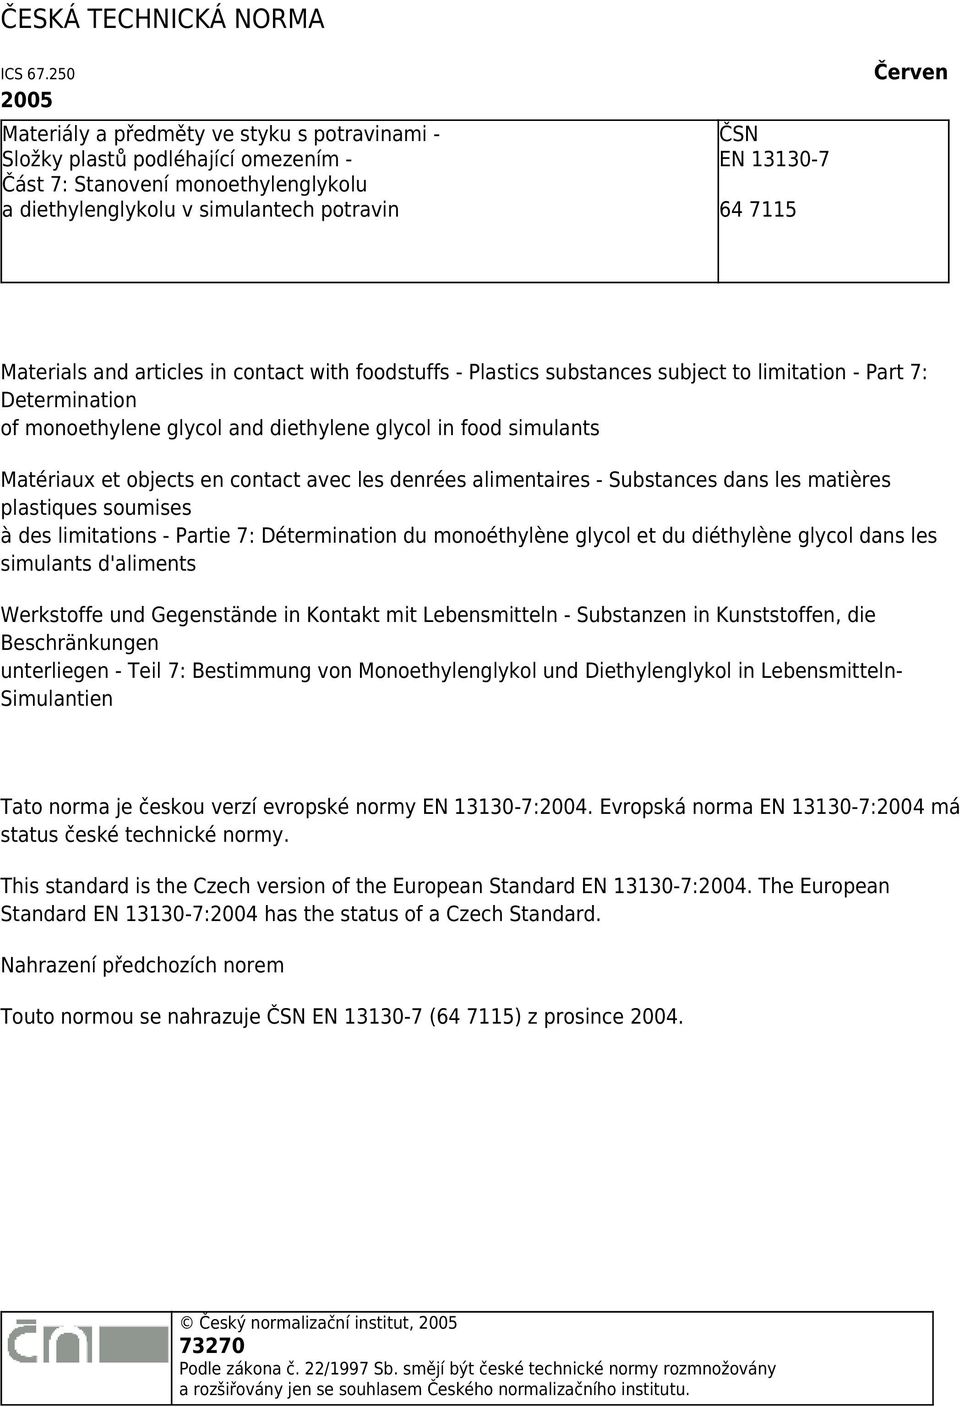 Červen Materials and articles in contact with foodstuffs - Plastics substances subject to limitation - Part 7: Determination of monoethylene glycol and diethylene glycol in food simulants Matériaux